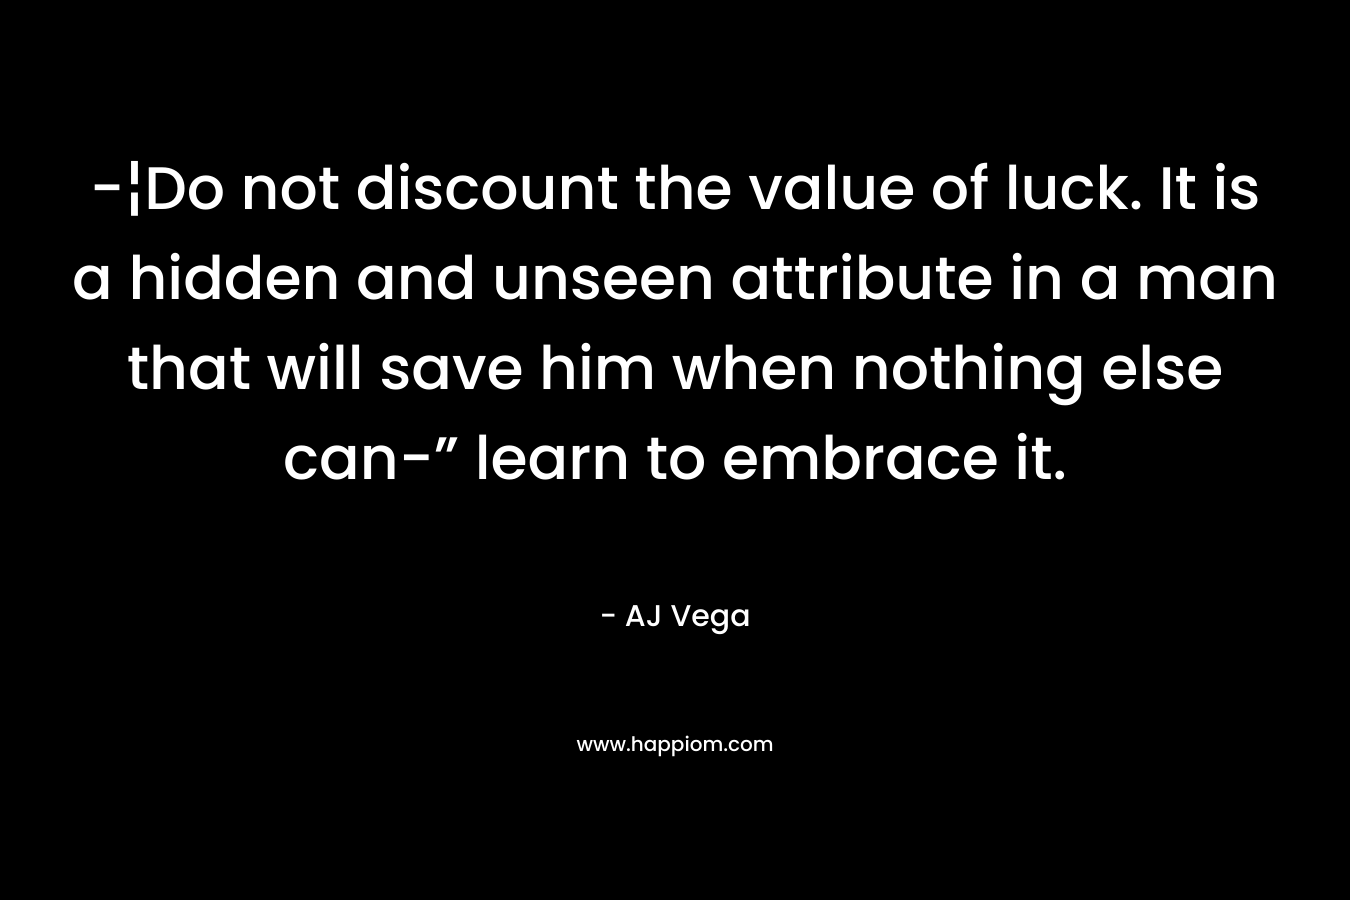 -¦Do not discount the value of luck. It is a hidden and unseen attribute in a man that will save him when nothing else can-” learn to embrace it.